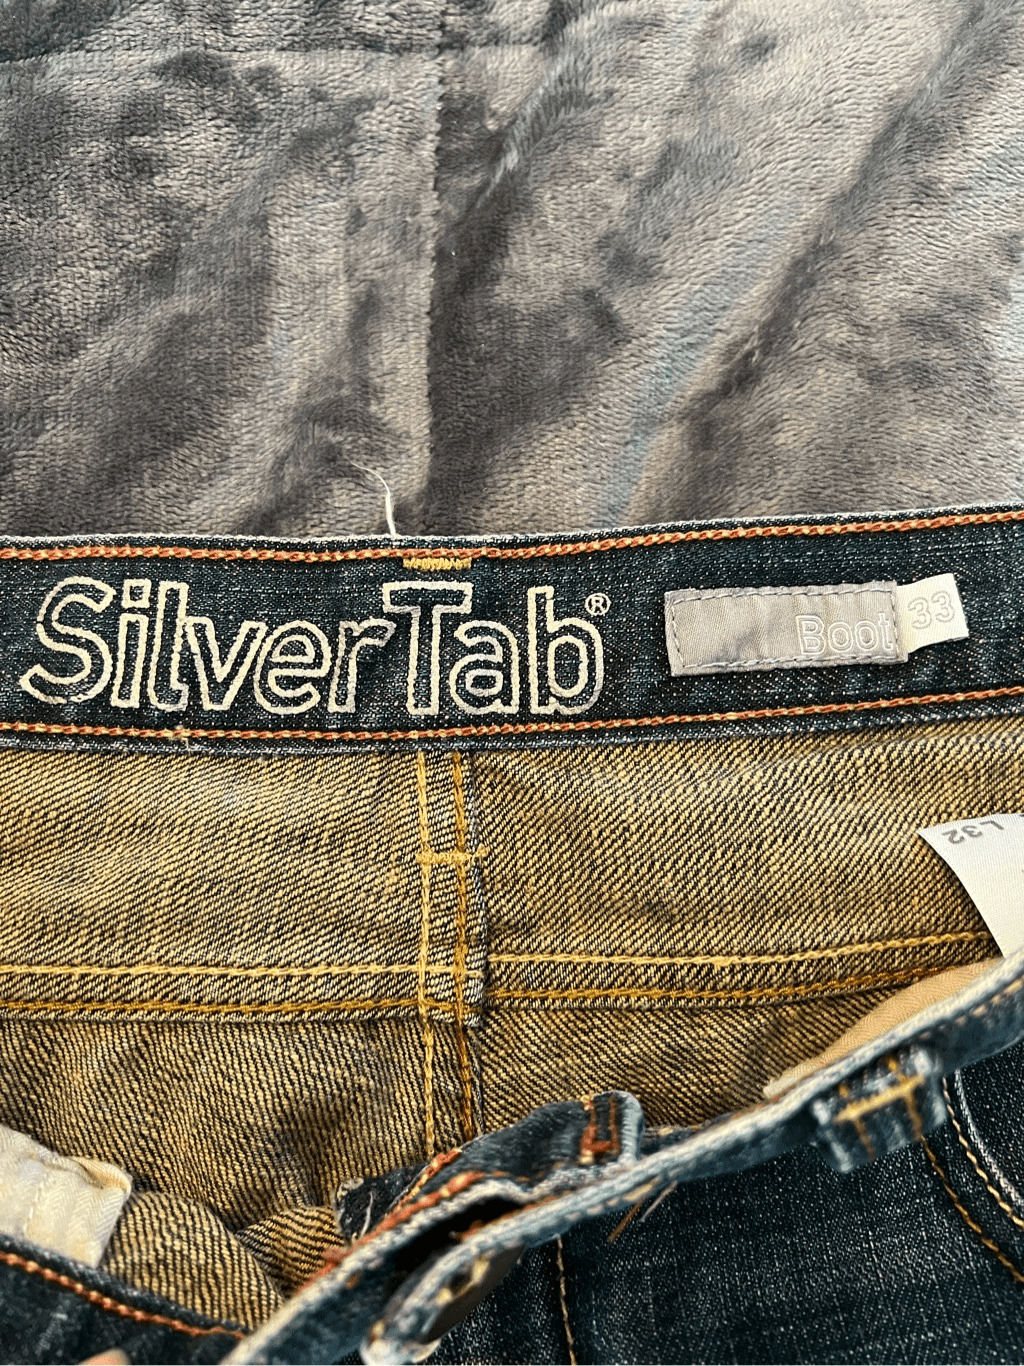 Levi’s silver tab boot cut jeans - image 3